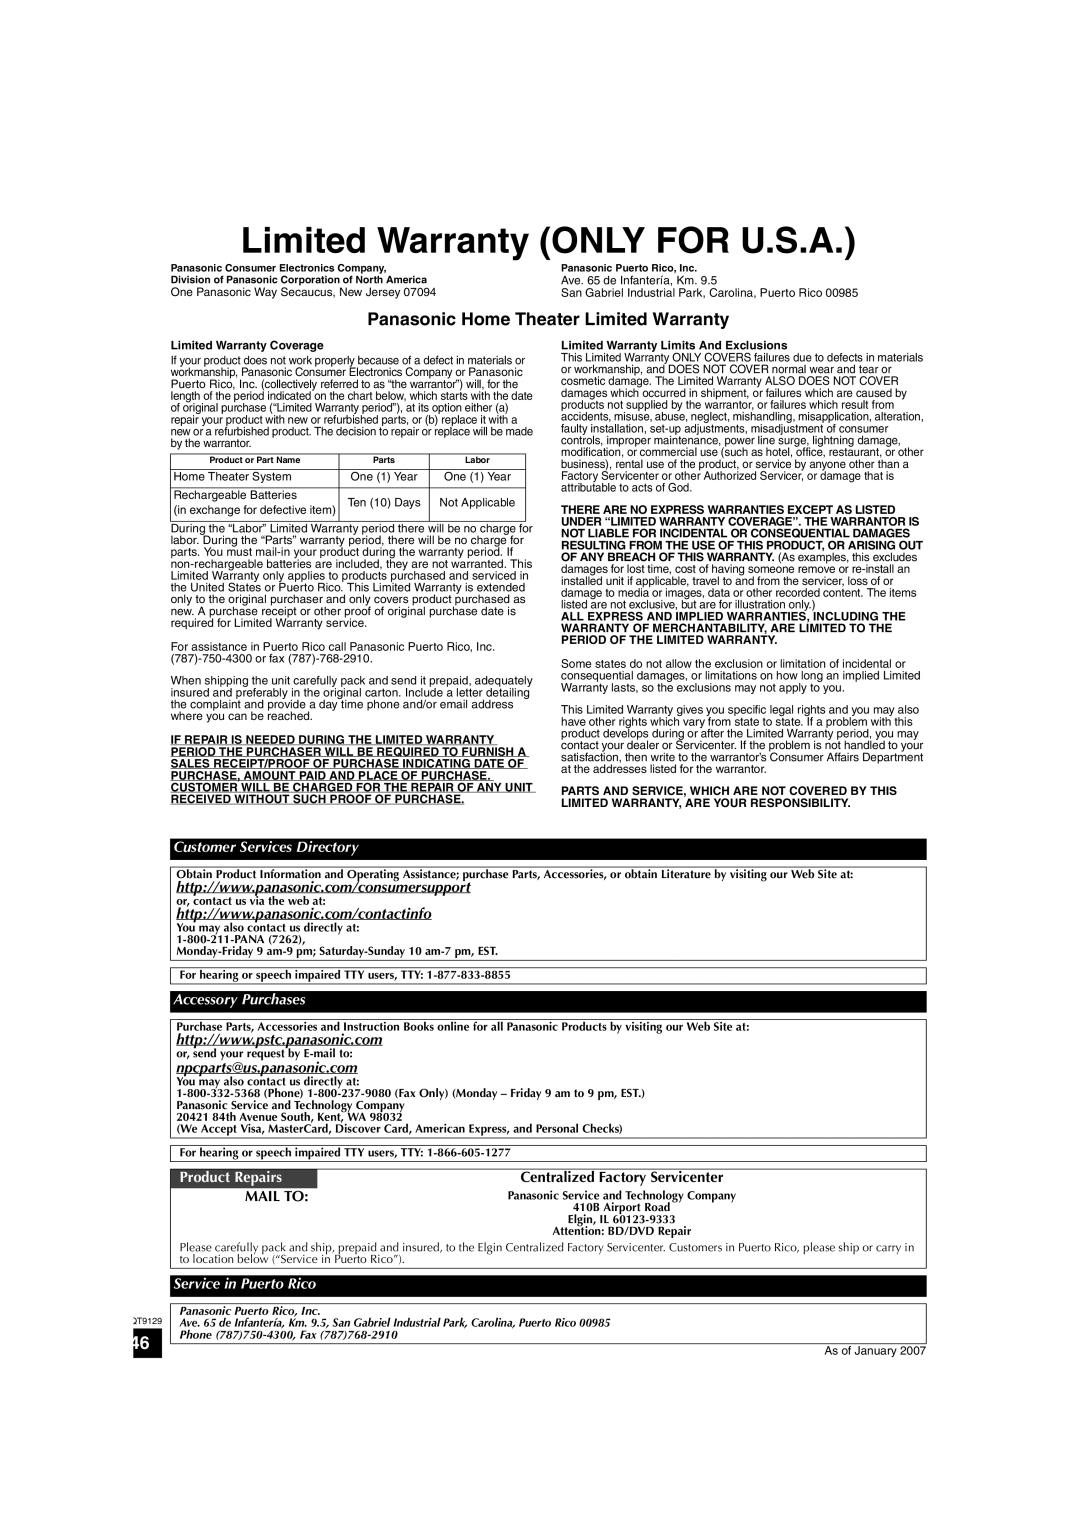 Panasonic SC-BT100 Limited Warranty ONLY FOR U.S.A, Panasonic Home Theater Limited Warranty, Mail To, Accessory Purchases 